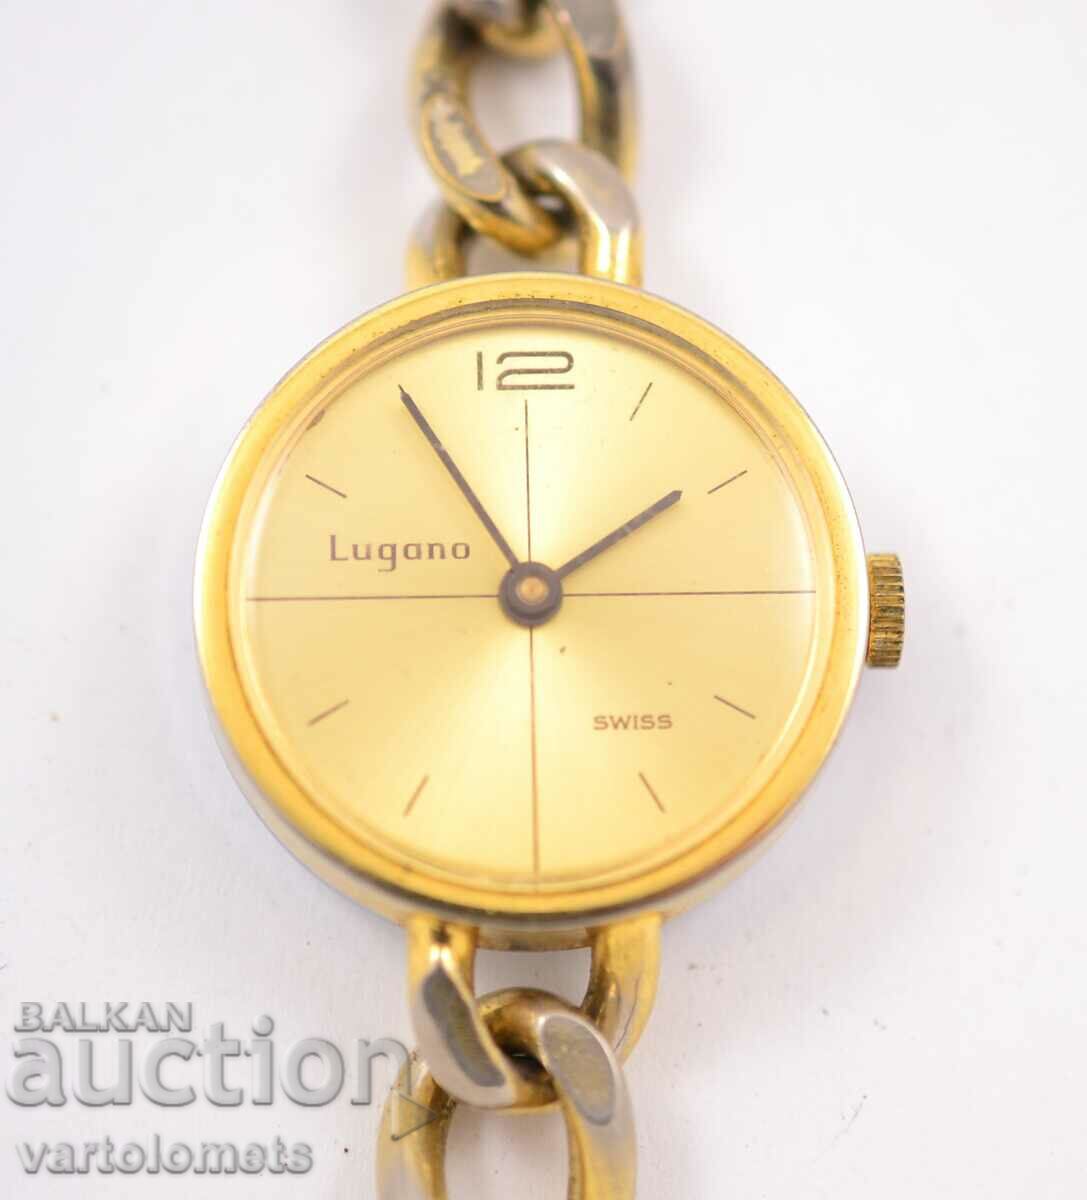 Women's watch LUGANO Swiss made with the puzzle - works